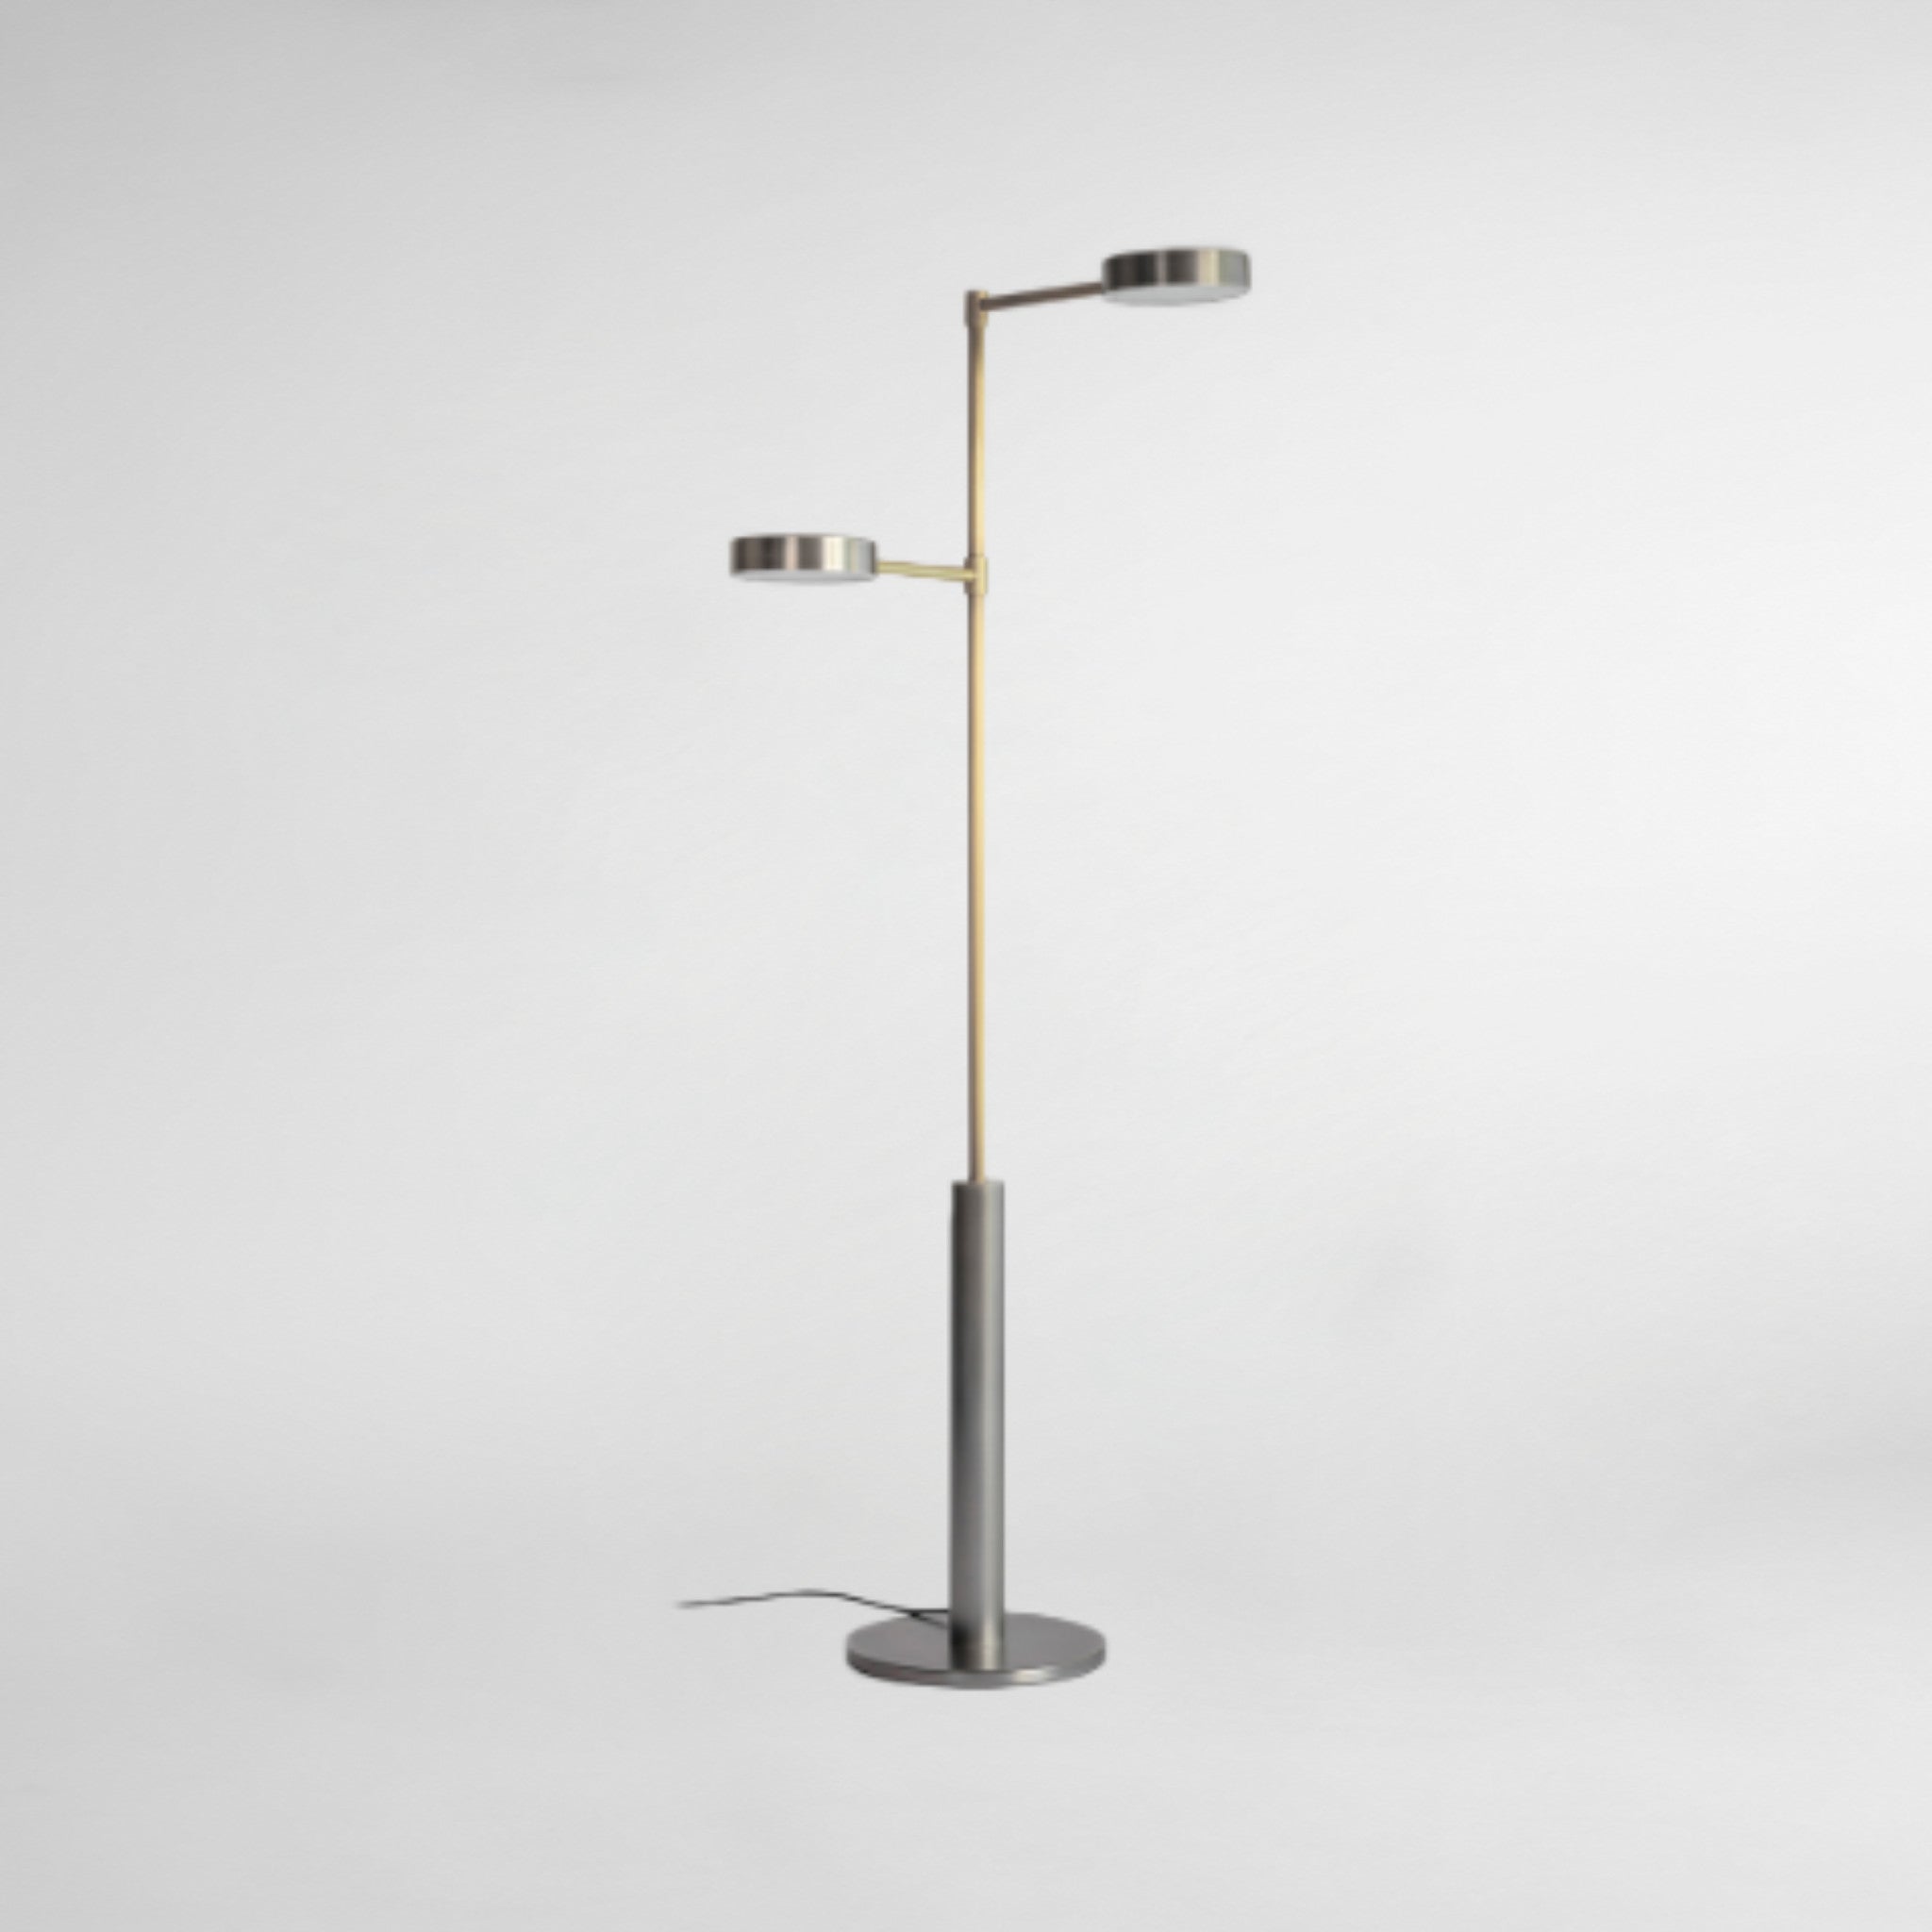 Two Cylinders Floor Lamp